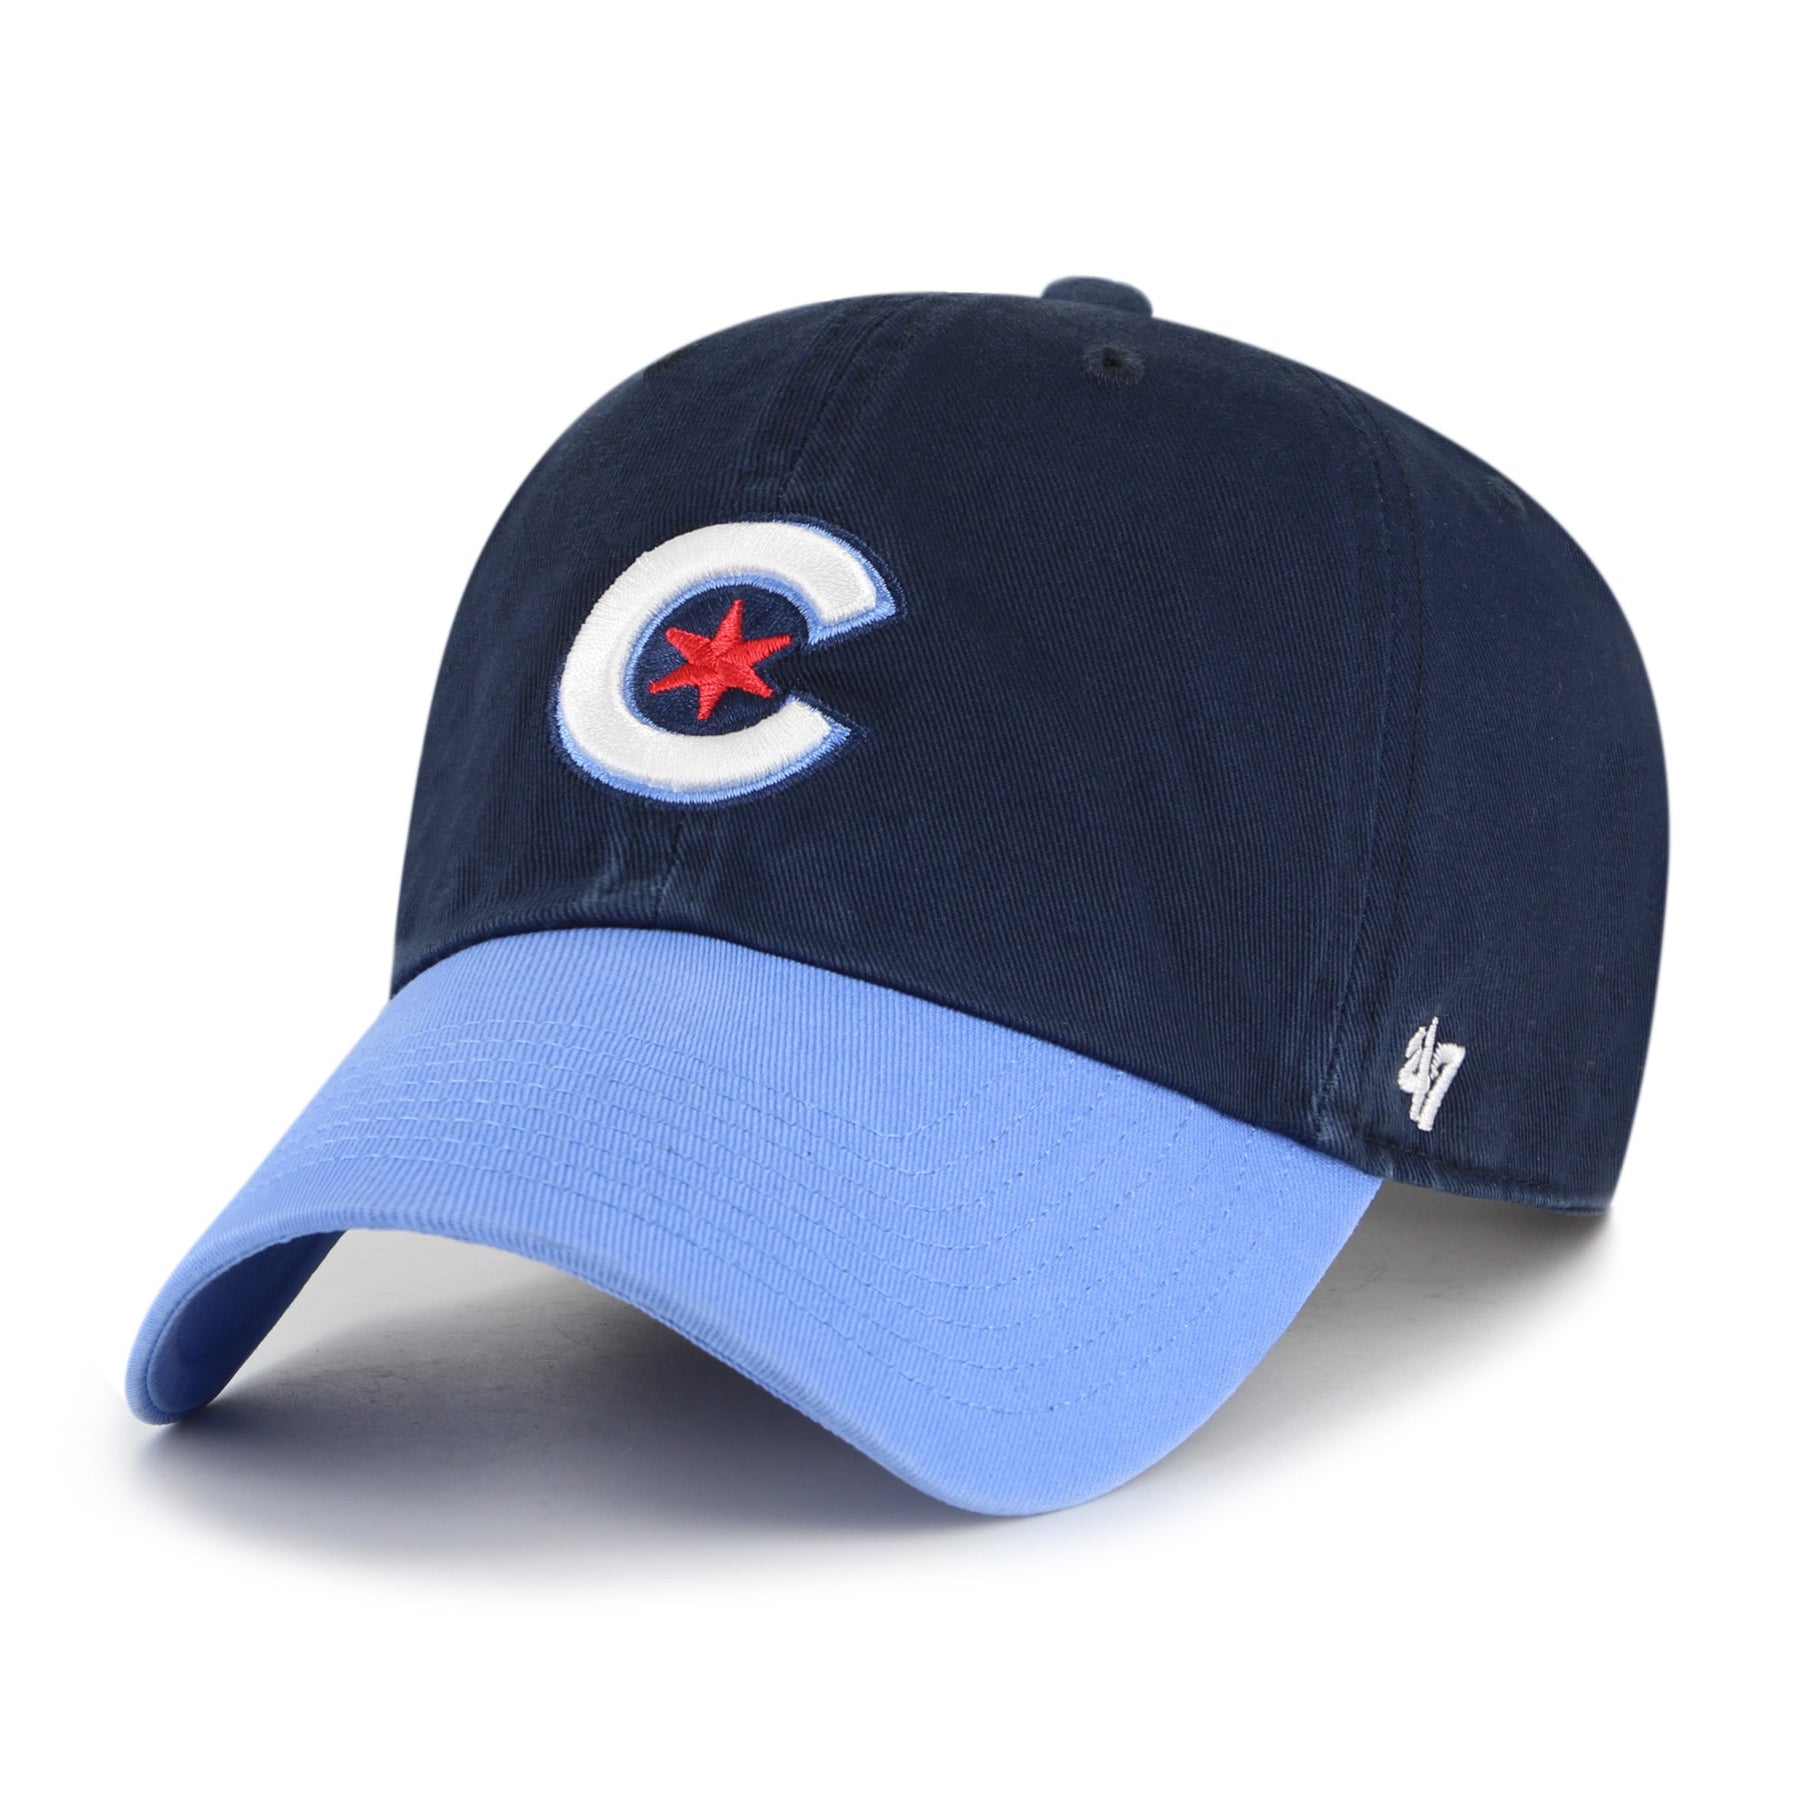 MLB Chicago Cubs Cap by 47 Brand --> Shop Hats, Beanies & Caps online ▷  Hatshopping